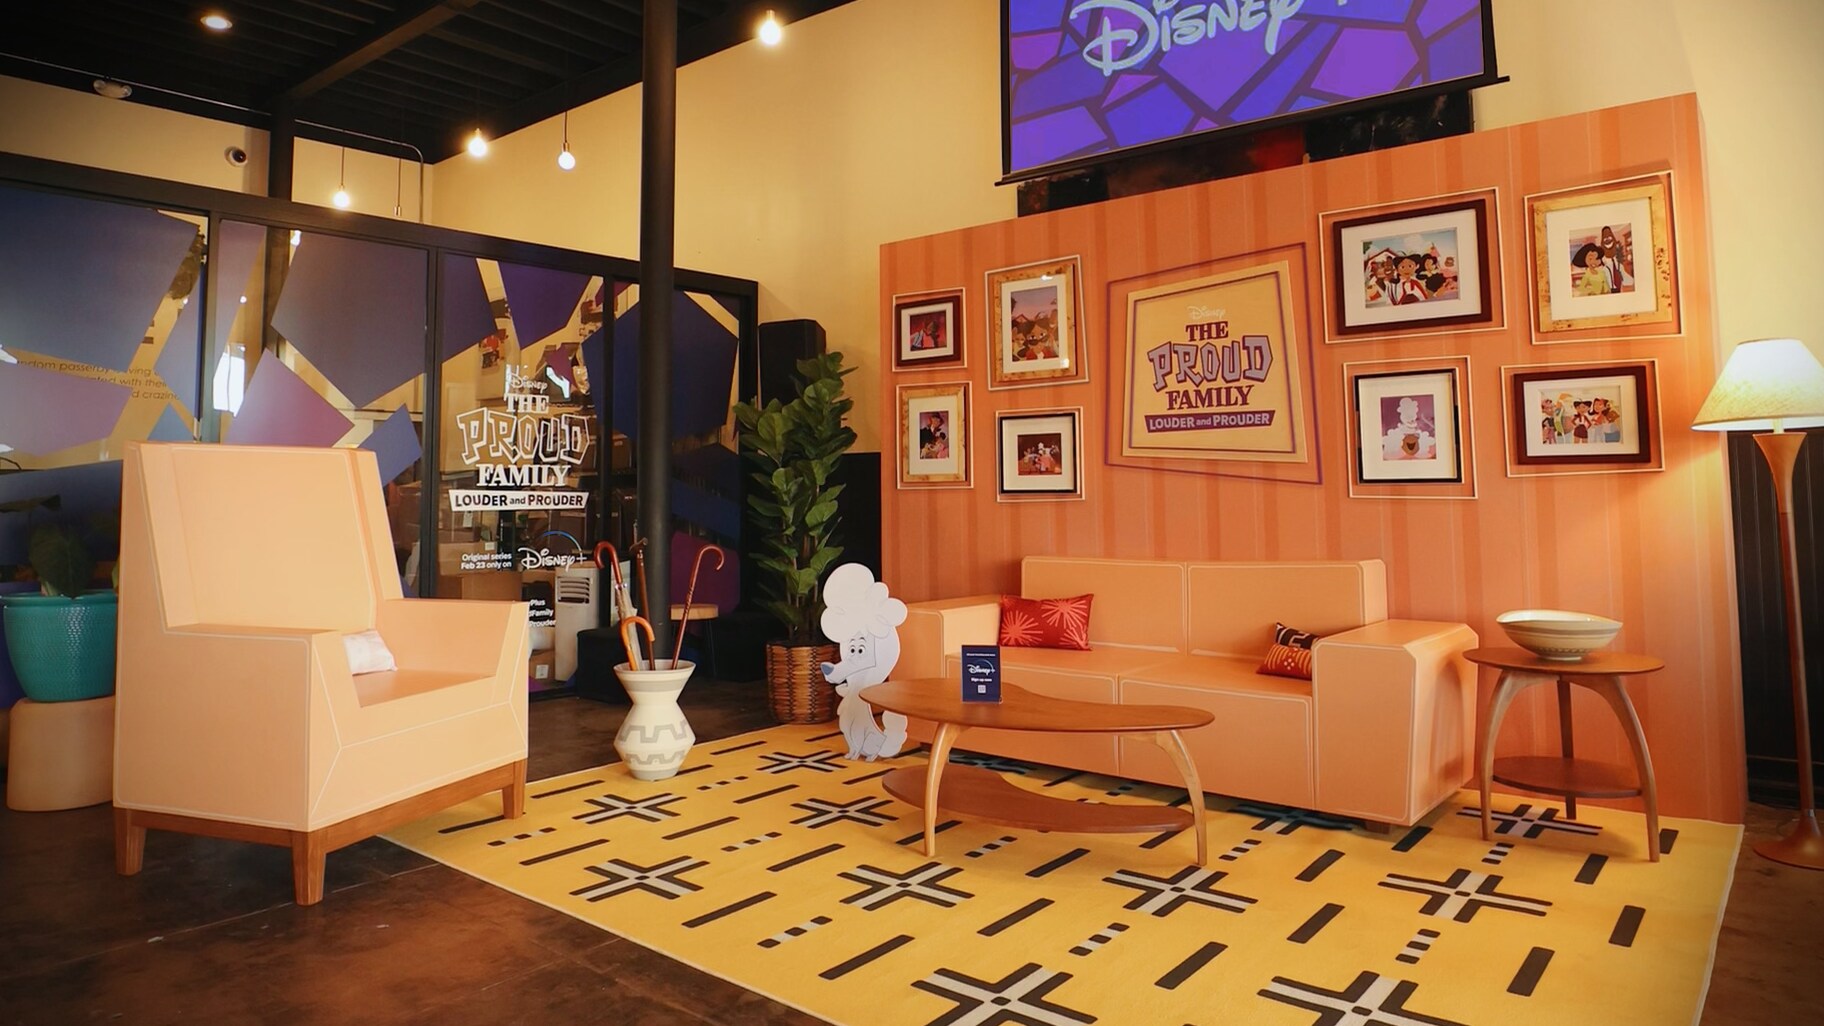 Disney+ at Sip & Sonder - "The Proud Family: Louder and Prouder" Living Room